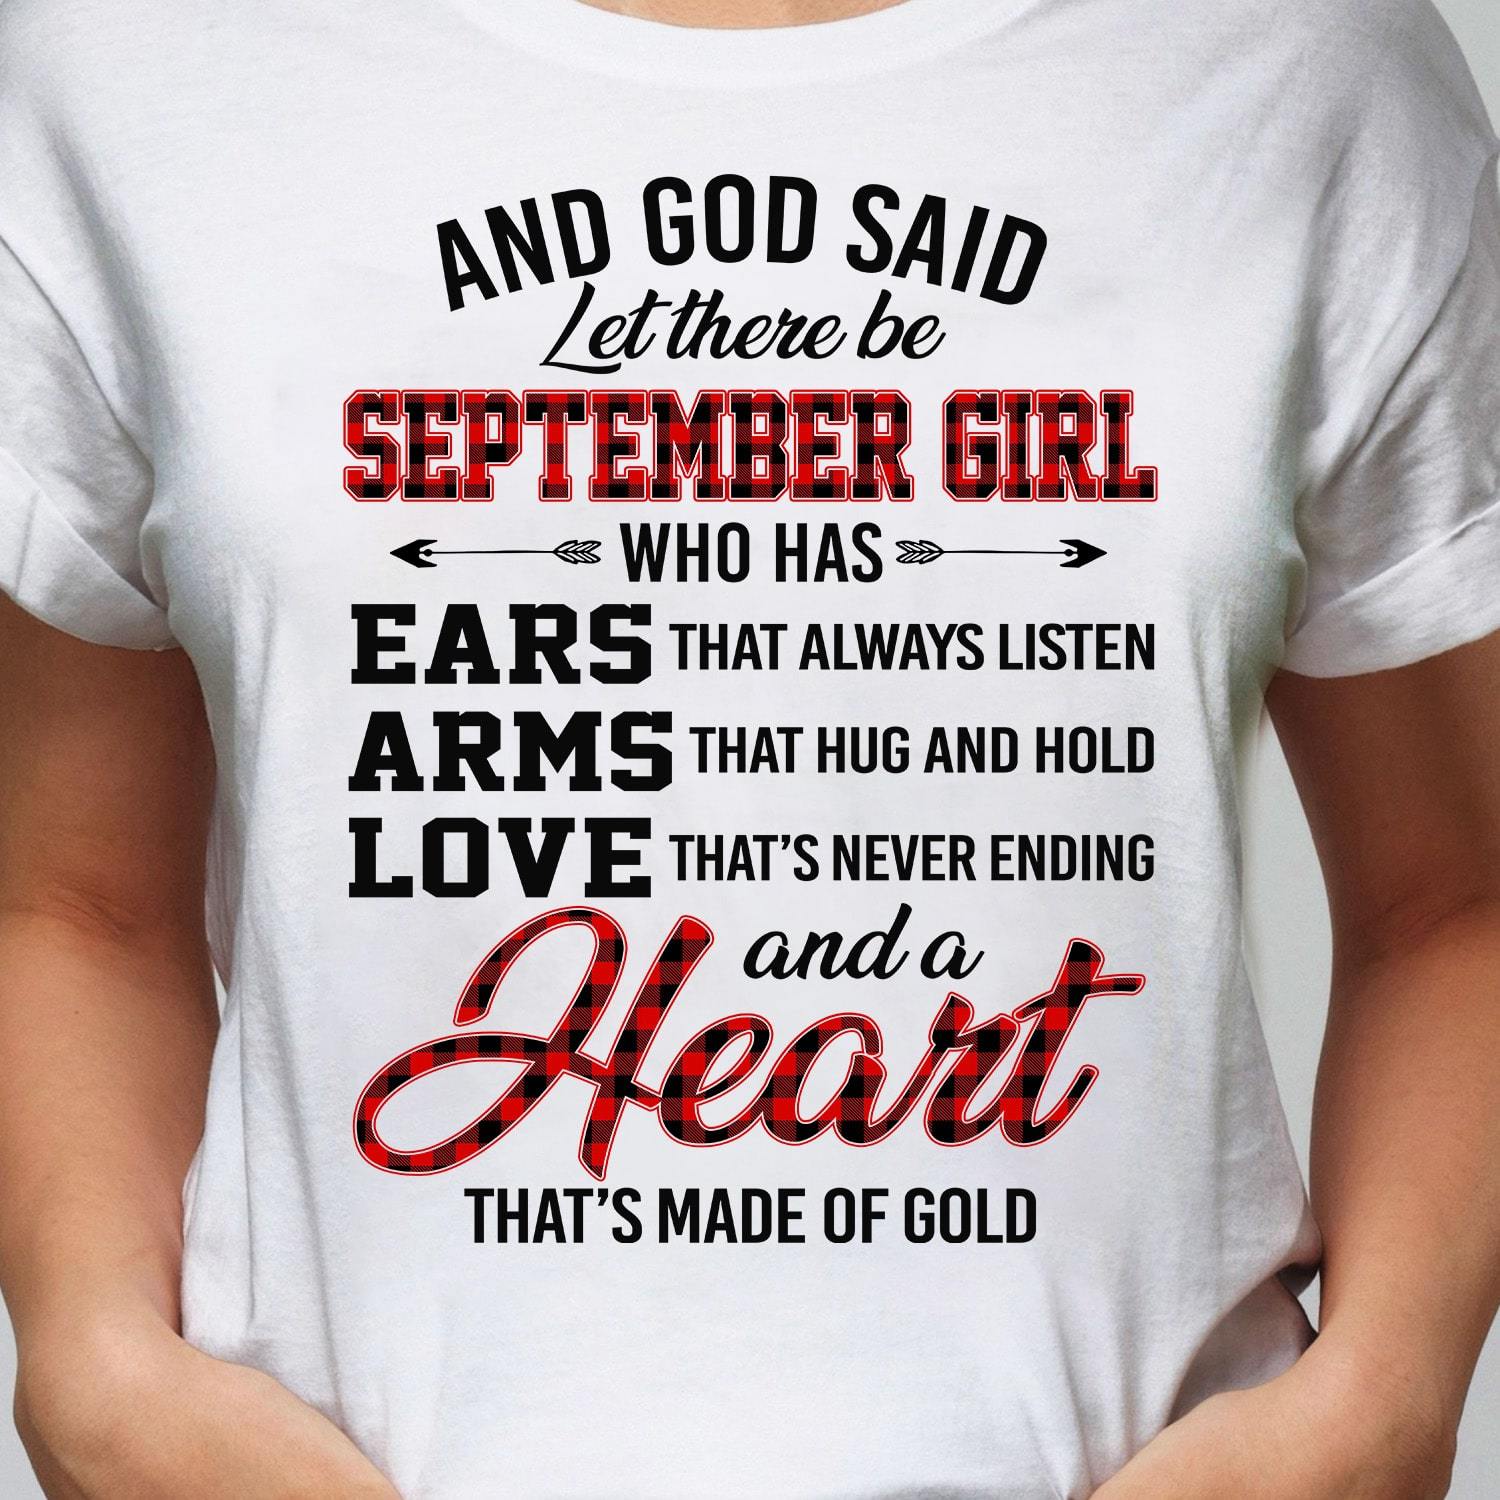 September Girl – And God said let there be – Jesus T Shirt